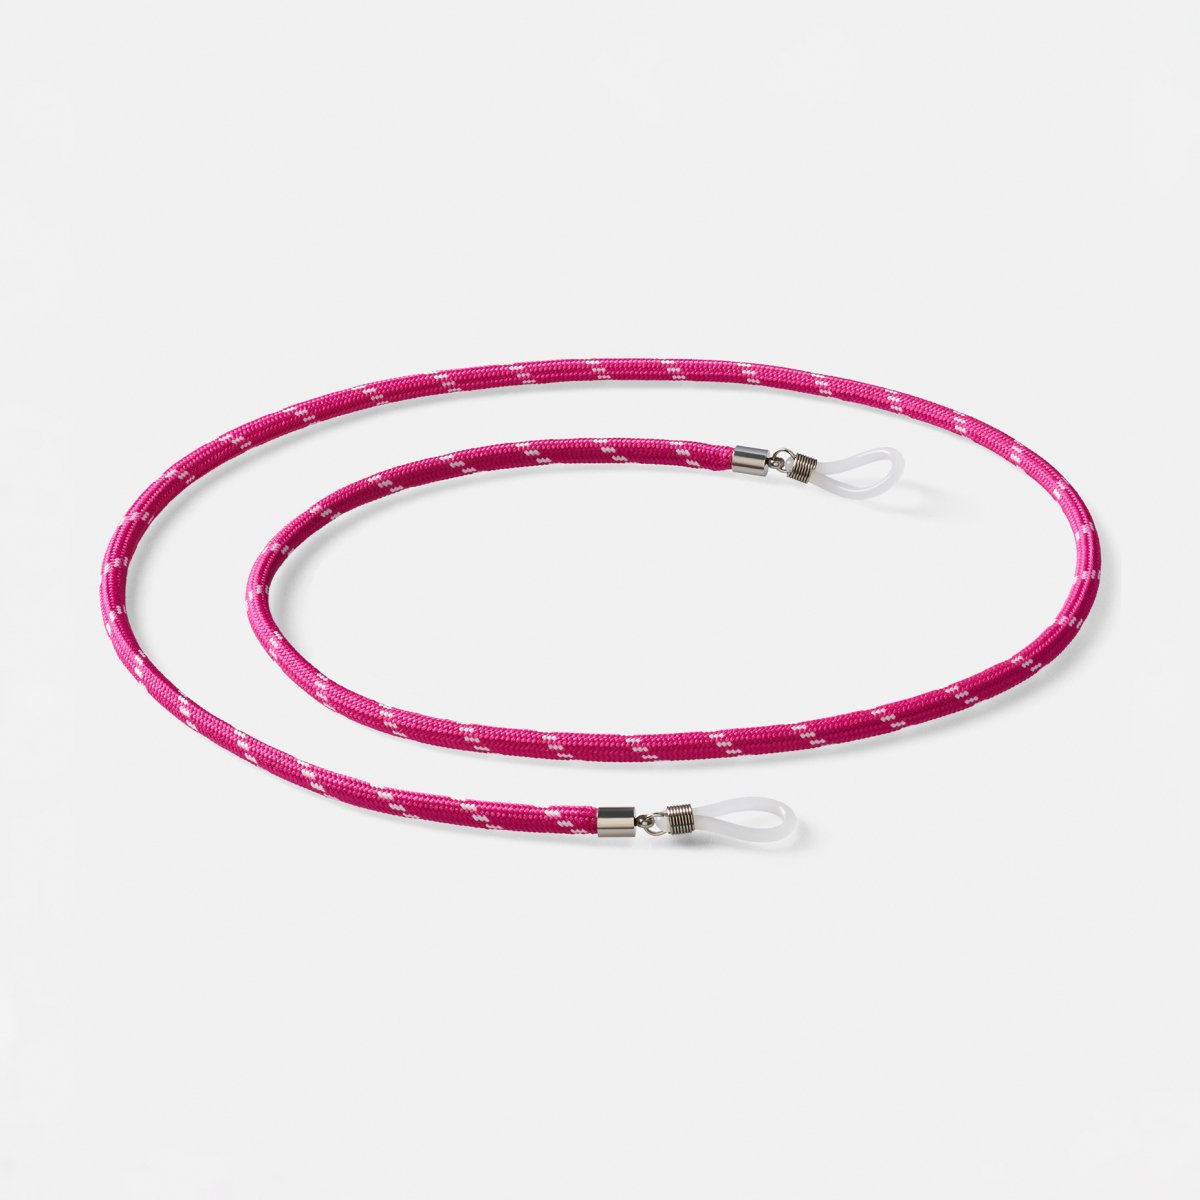 Ace & Tate Accessory Twisted Cord 